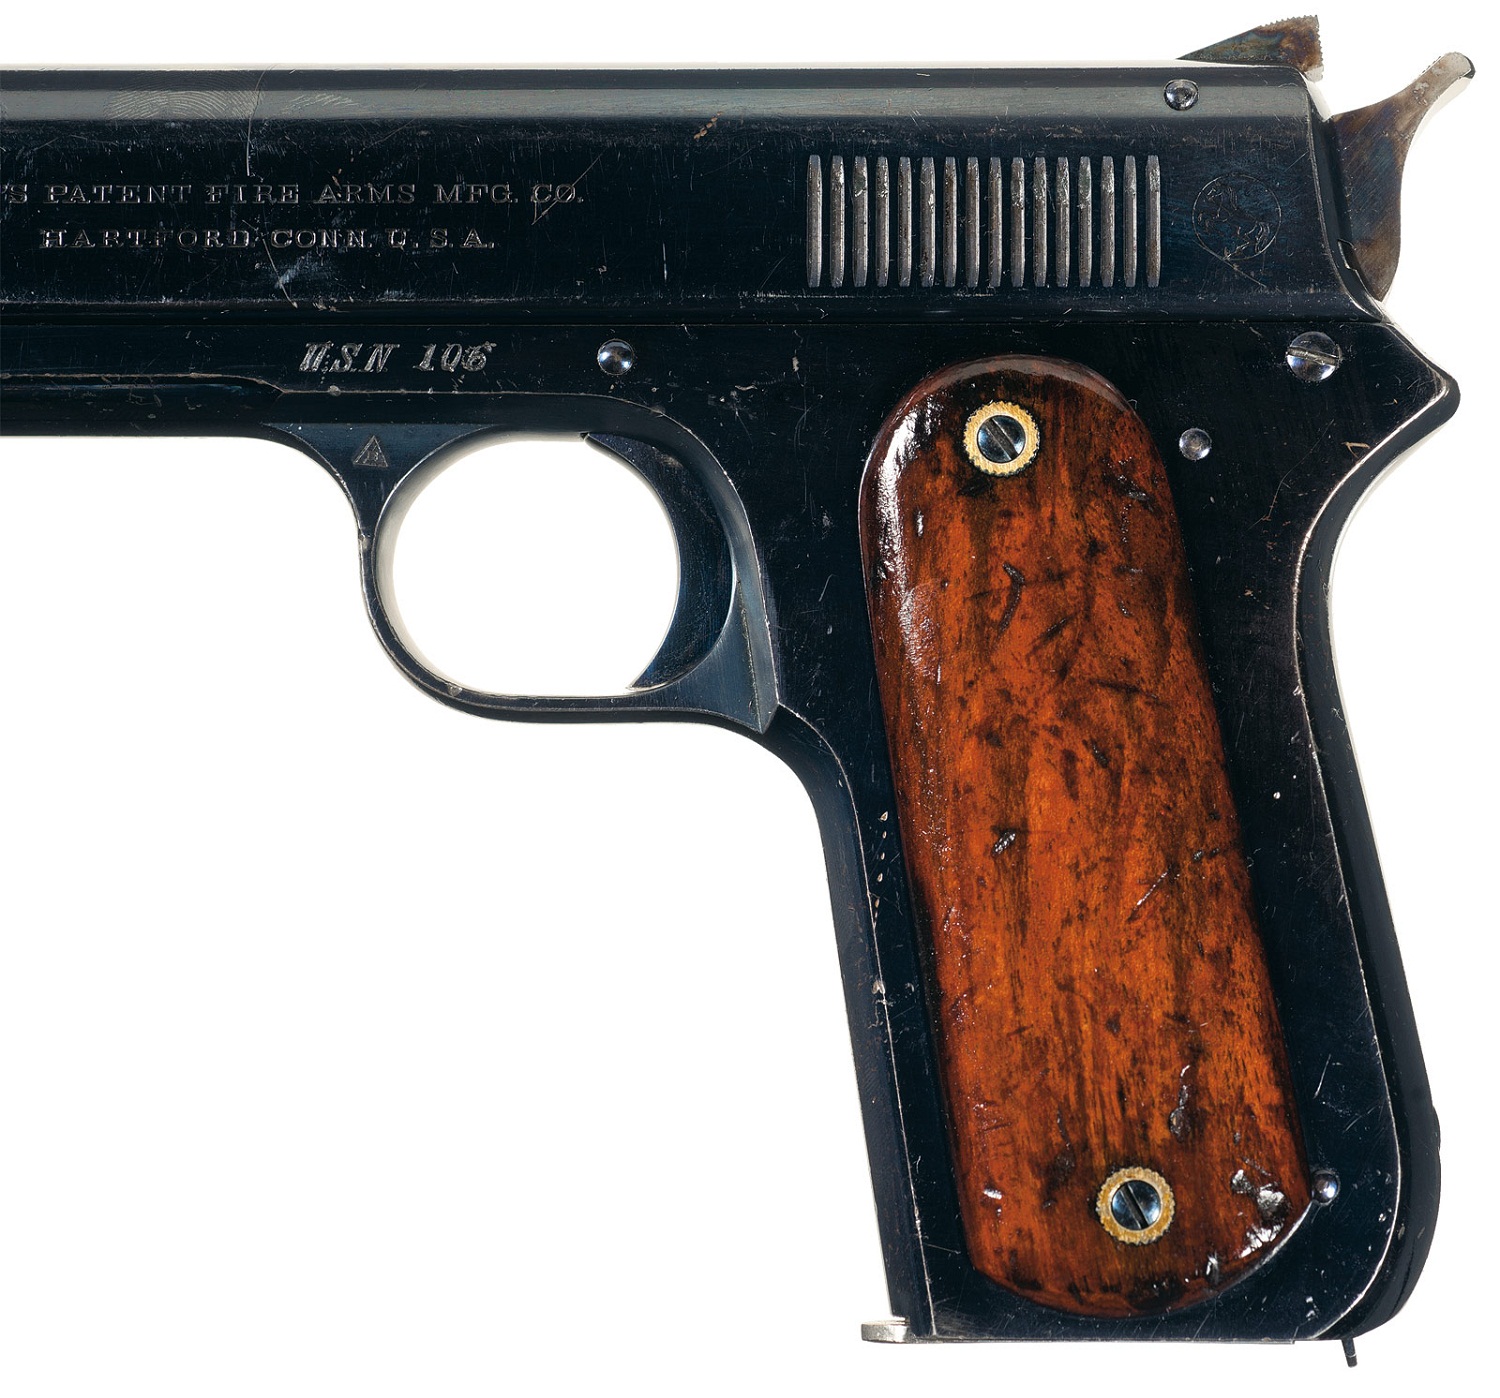 Navy Contract - The Colt Model 1900